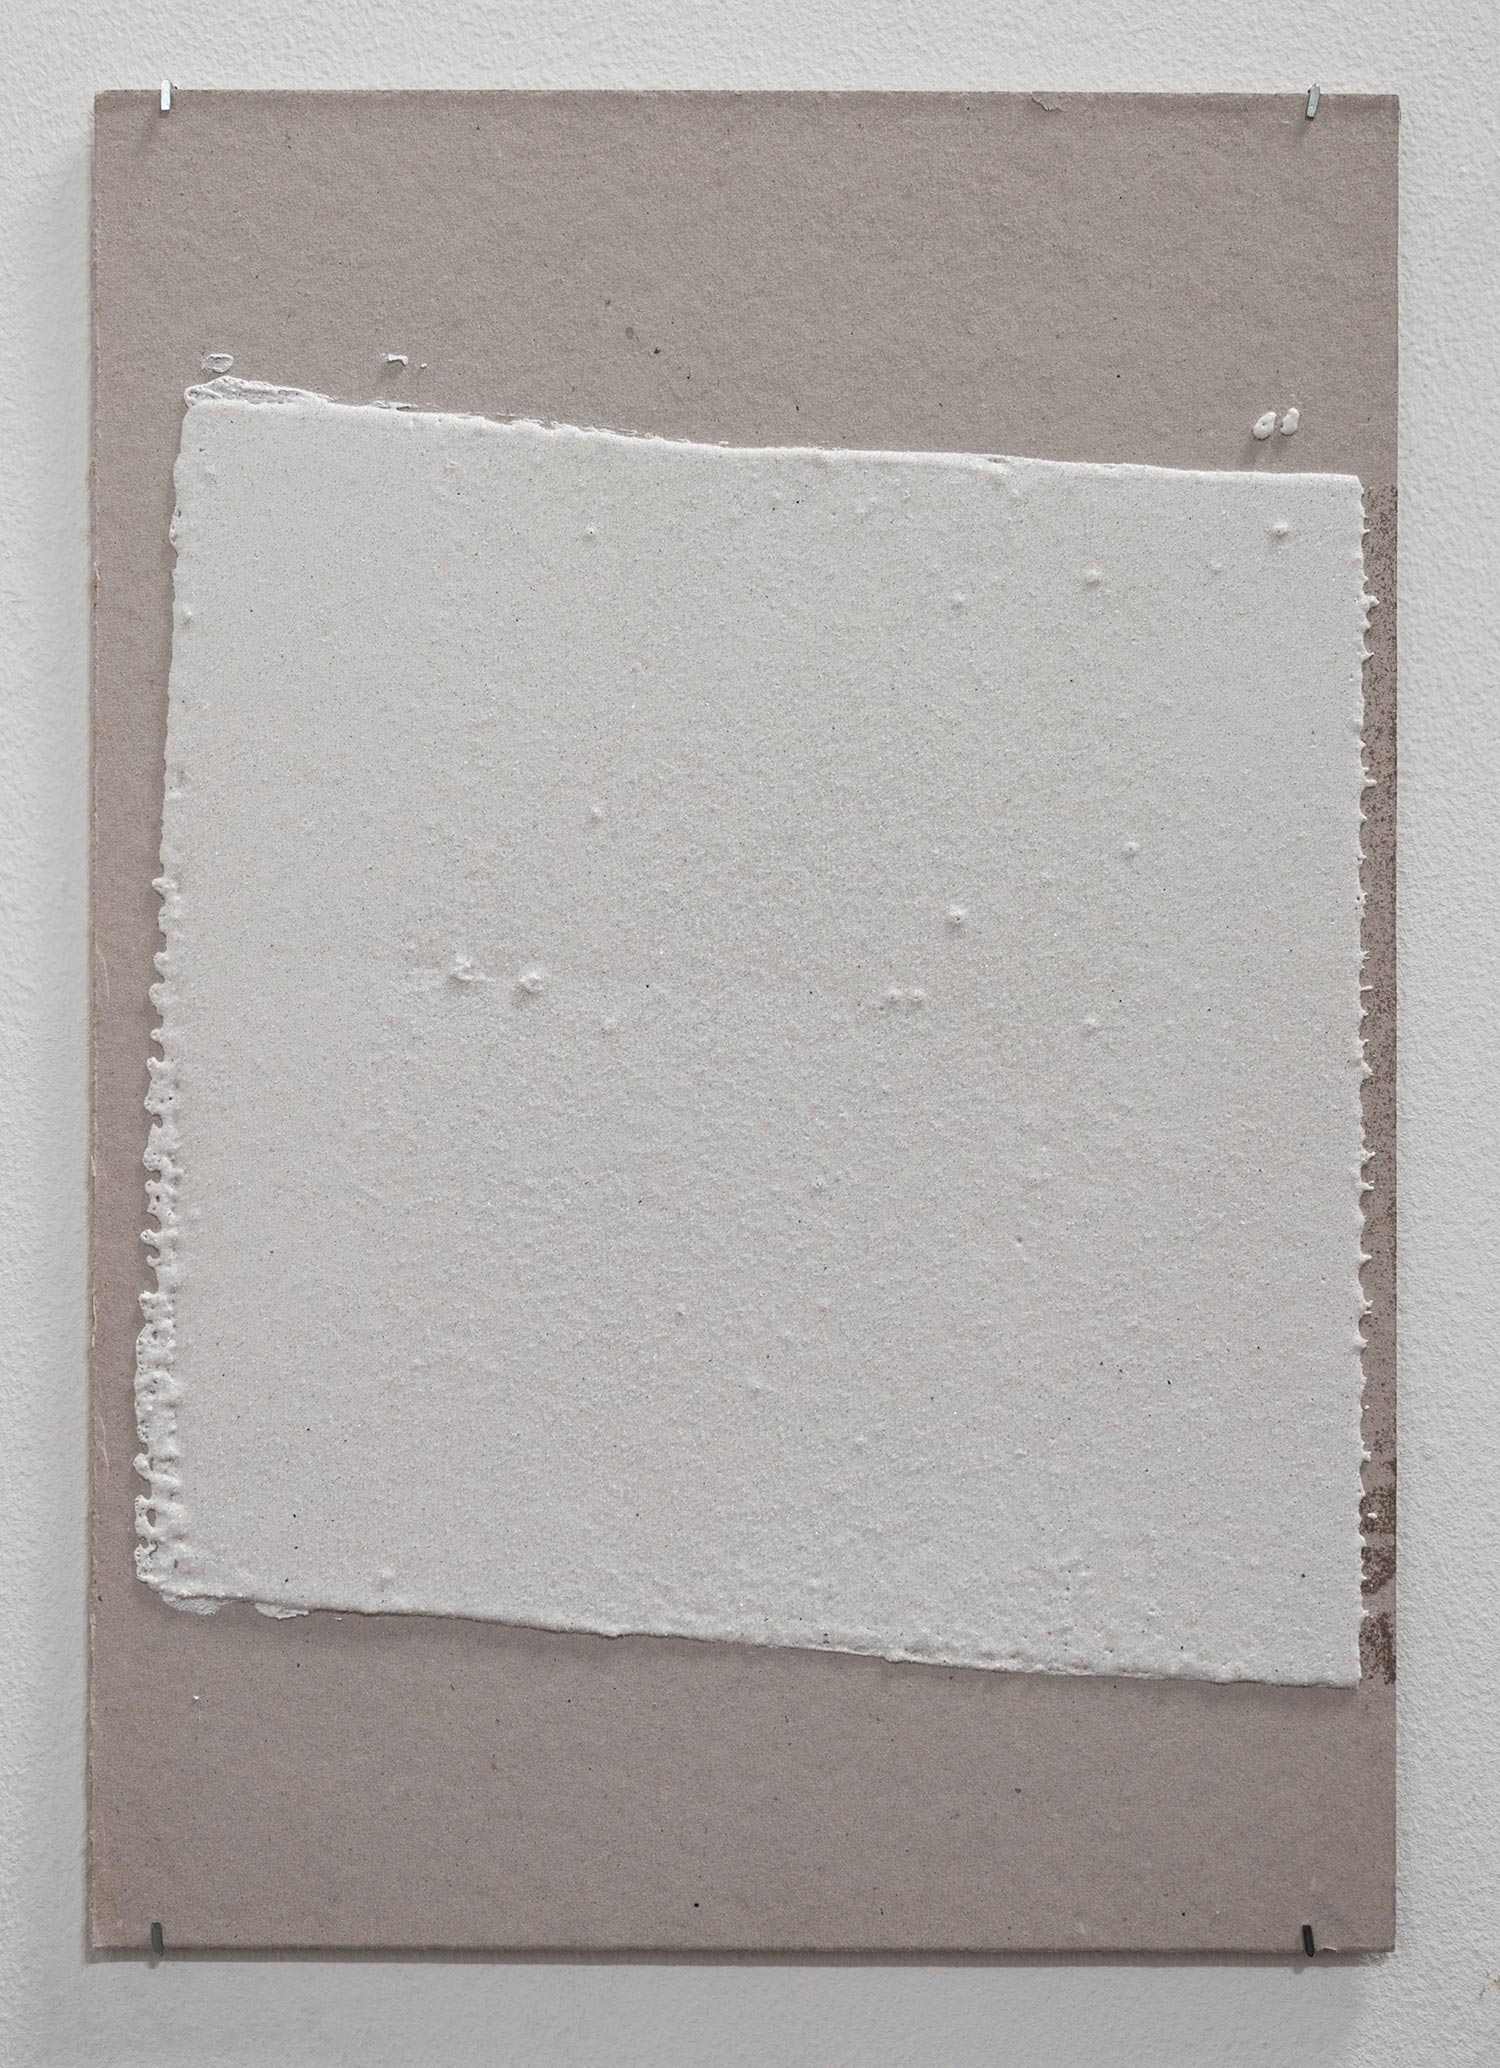   300mm (W), 1.5mm (T), white, Random mark, hand marking, Al Barsha 1, St 11,  2016  Thermoplastic paint and reflective glass particles on grey board  35 x 50 cm 